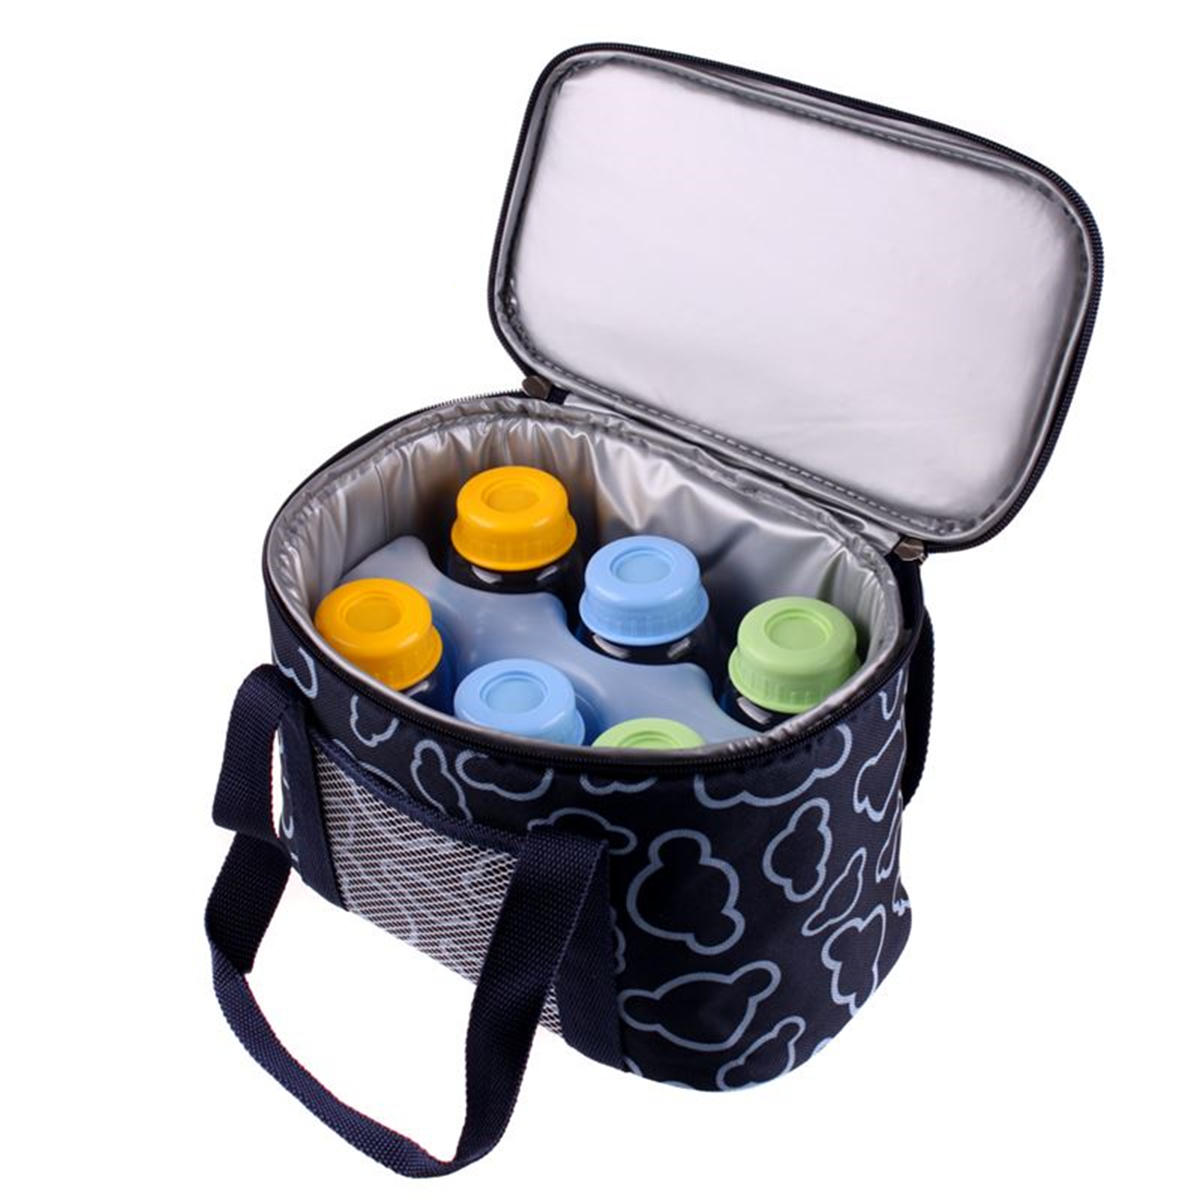 4.5L Outdoor Picnic Bag Waterproof Insulated Thermal Cooler Lunch Box Tote Lunch Food Container